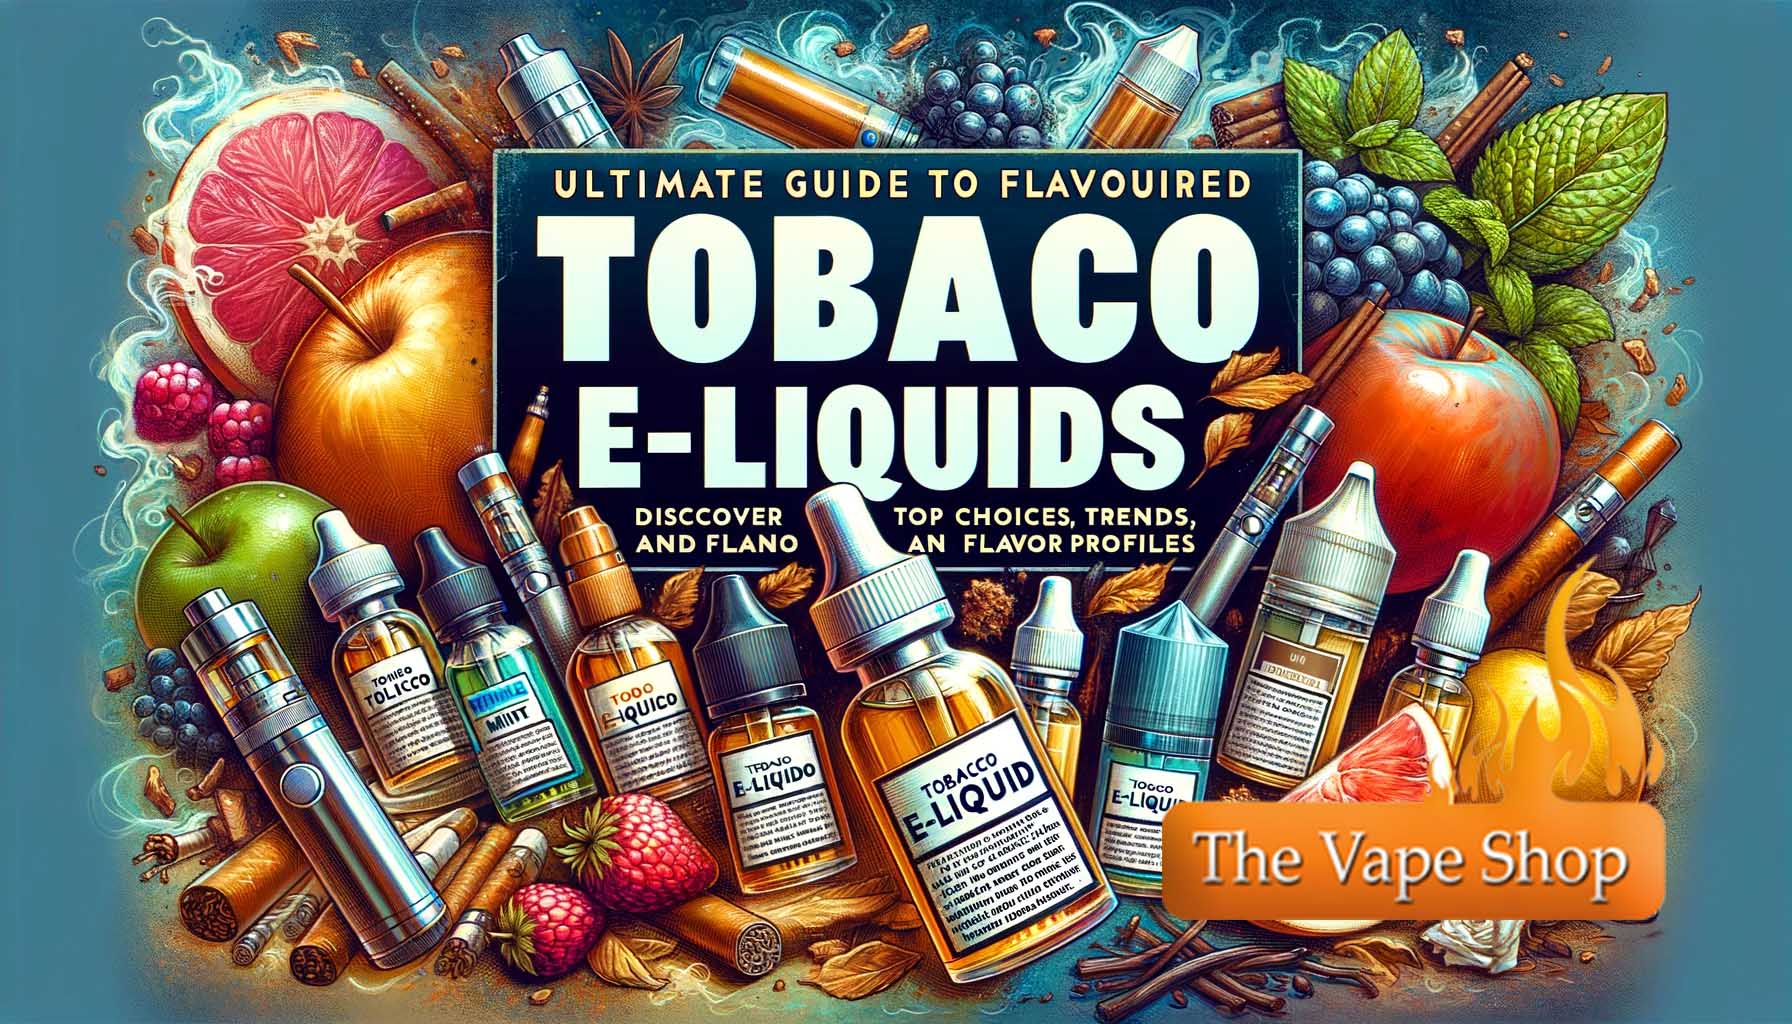 Ultimate Guide to Flavoured Tobacco E-Liquids: Discover Top 10 Choices, Trends, and Flavour Profiles